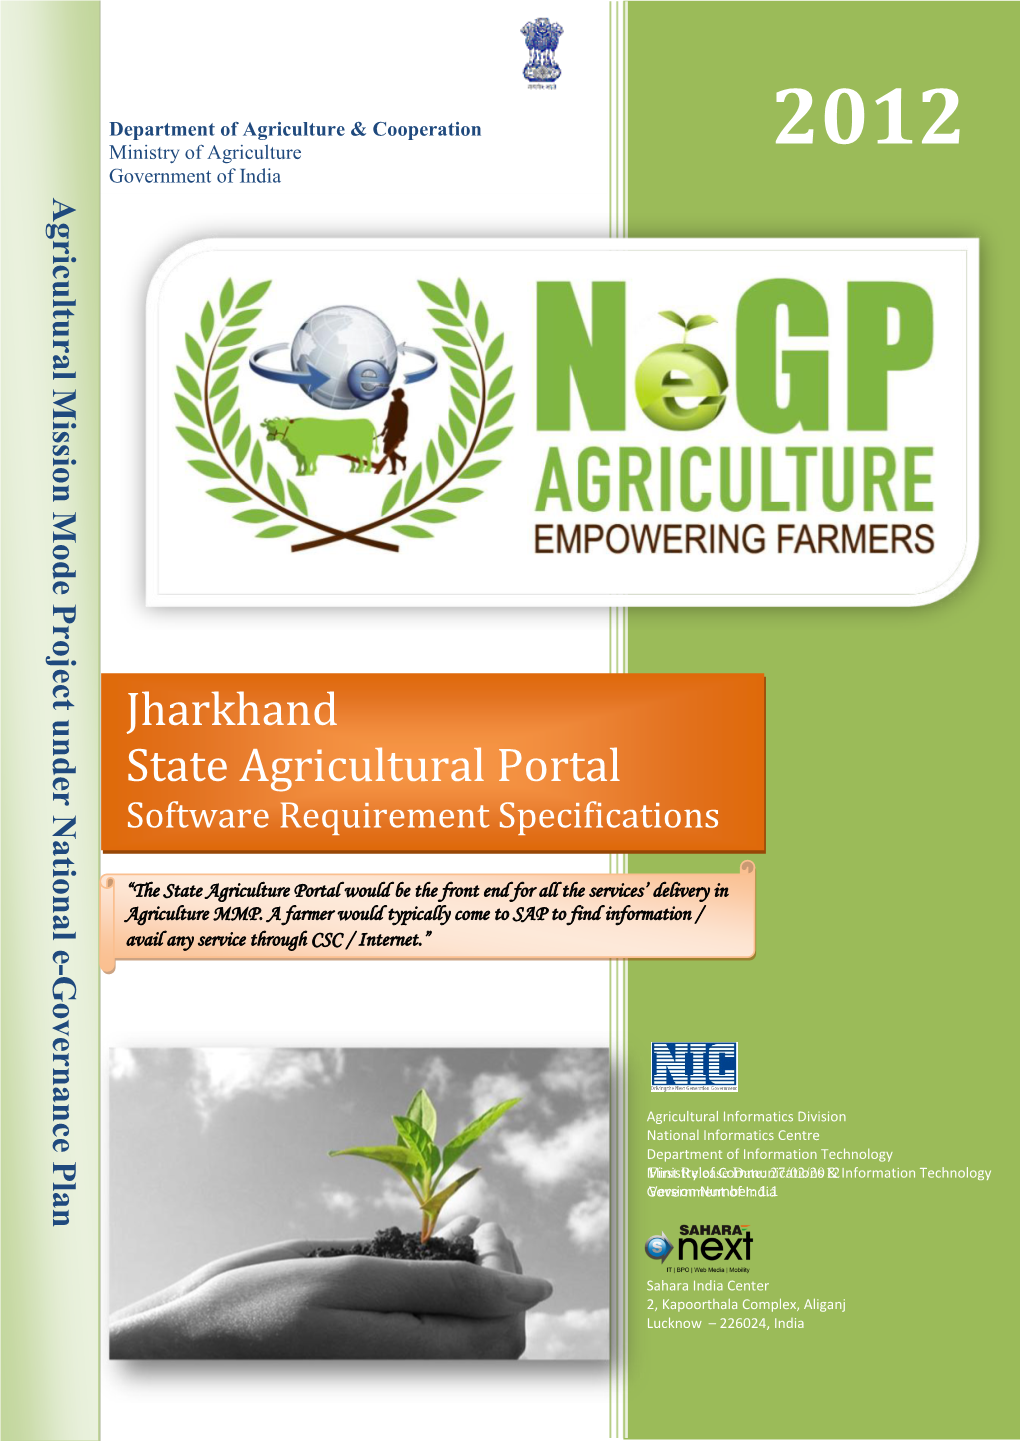 Jharkhand State Agricultural Portal